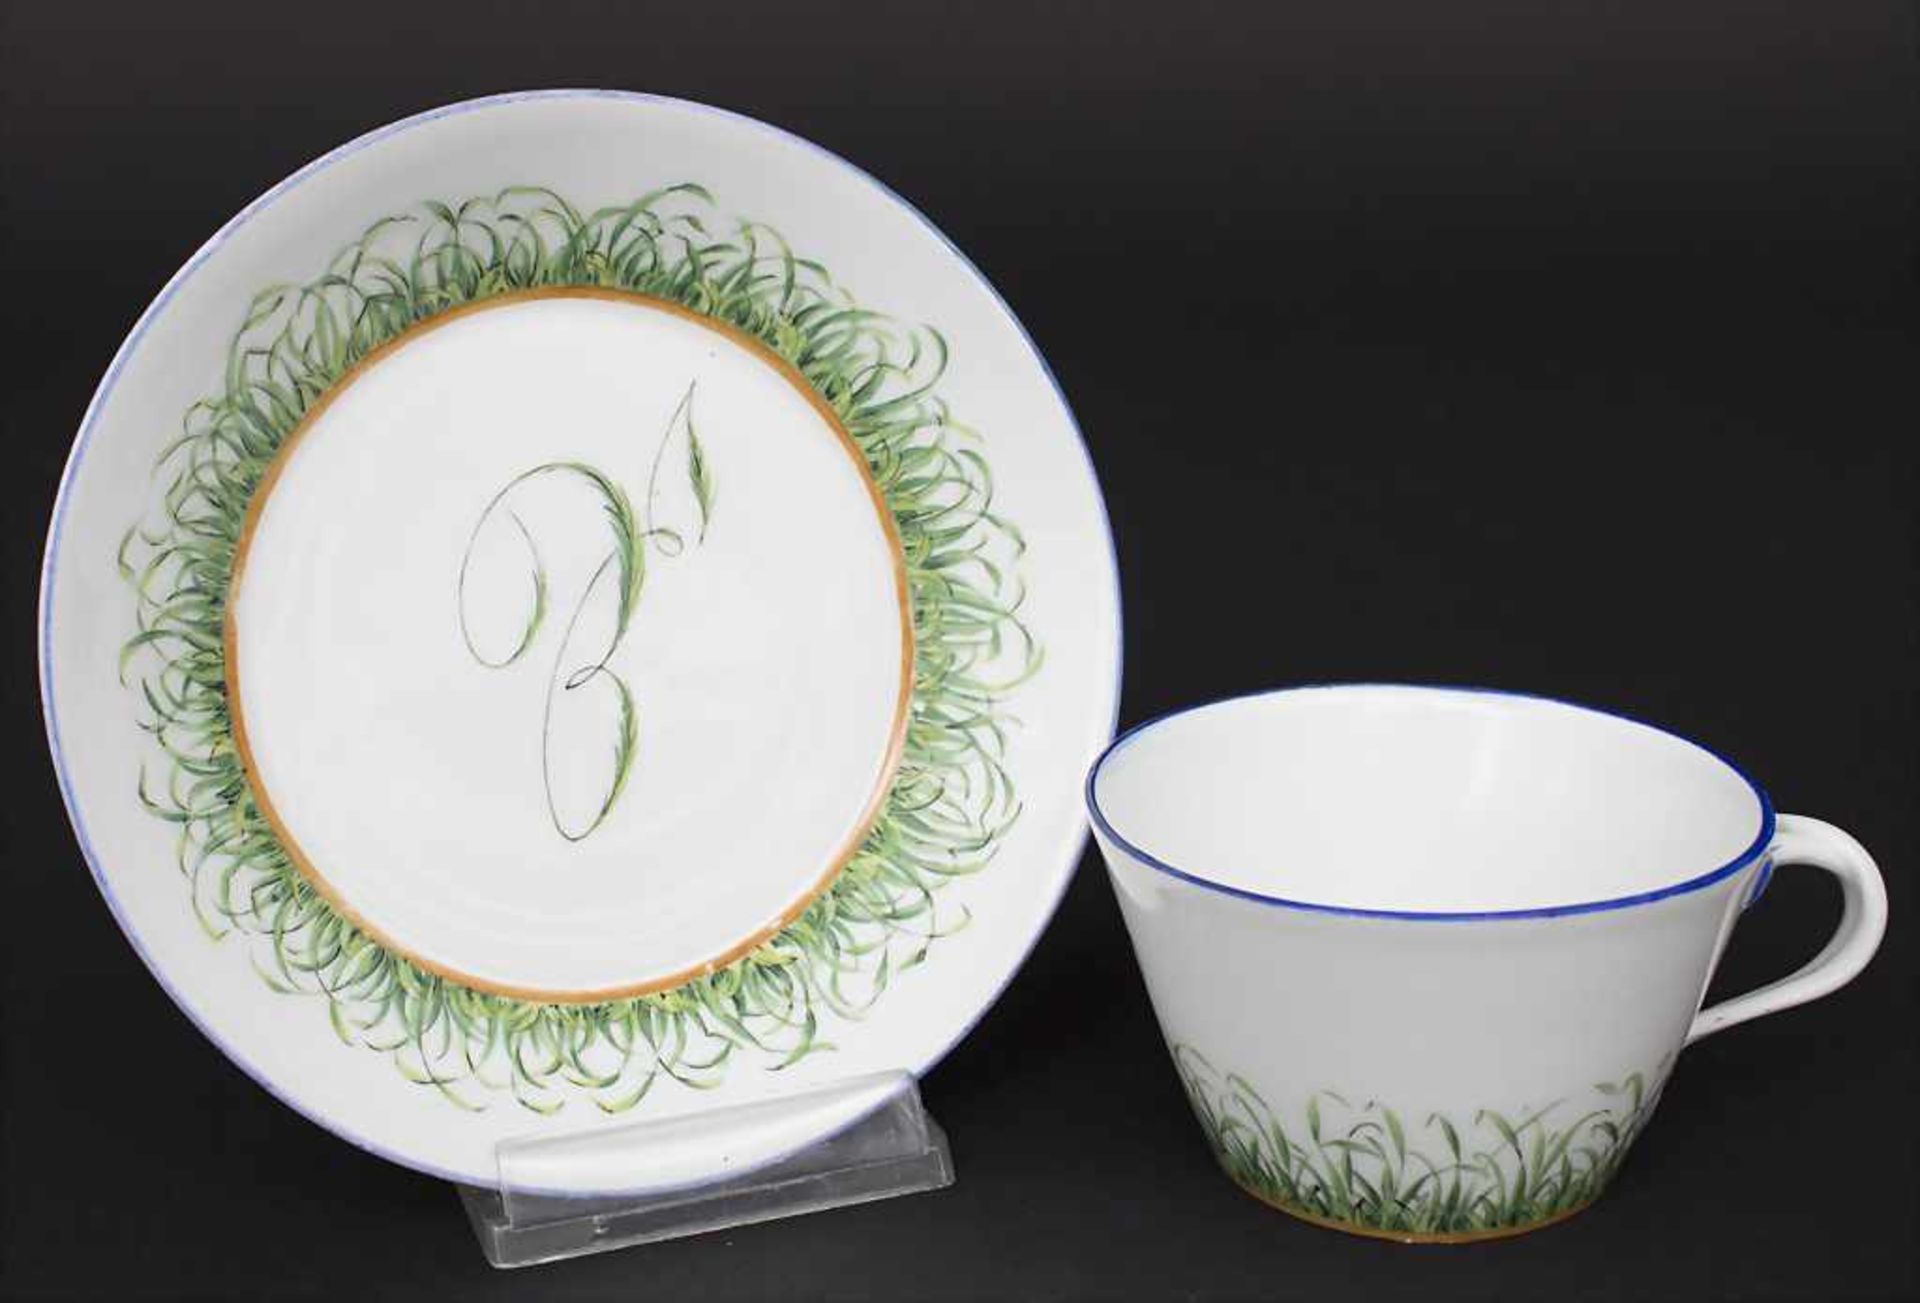 Tasse und UT mit Monogramm / A cup with saucer with monogram, Meissen, Anfang 19. Jh.Material: